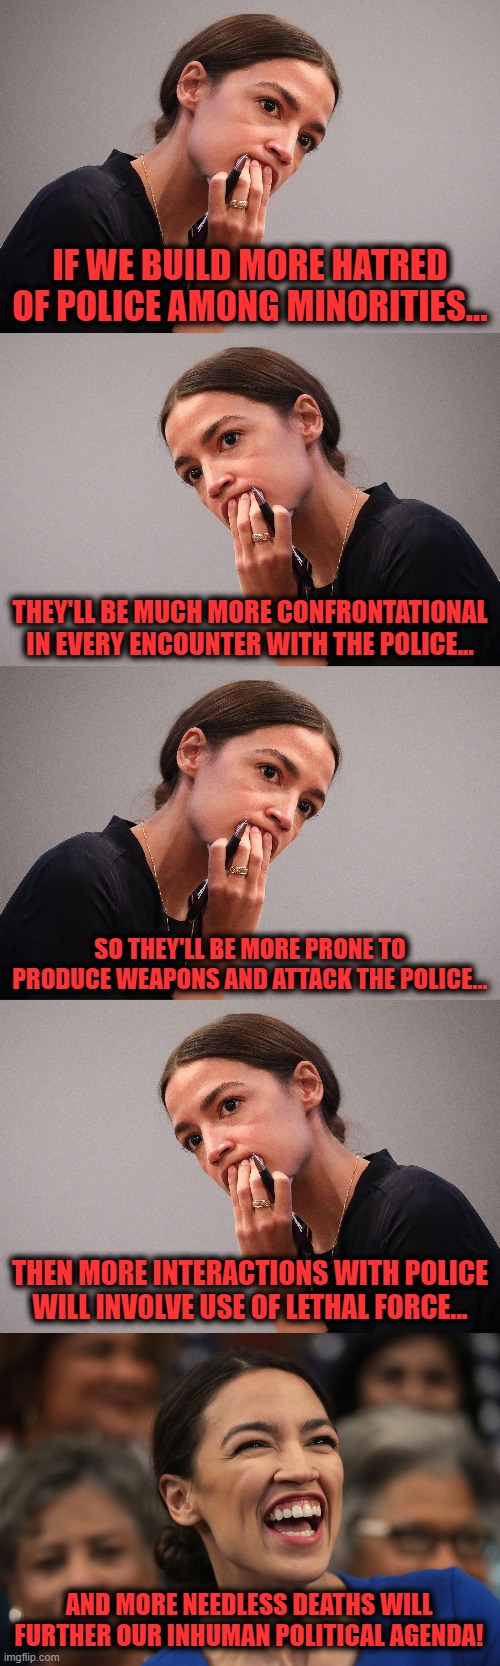 How this works | IF WE BUILD MORE HATRED OF POLICE AMONG MINORITIES... THEY'LL BE MUCH MORE CONFRONTATIONAL IN EVERY ENCOUNTER WITH THE POLICE... SO THEY'LL BE MORE PRONE TO PRODUCE WEAPONS AND ATTACK THE POLICE... THEN MORE INTERACTIONS WITH POLICE WILL INVOLVE USE OF LETHAL FORCE... AND MORE NEEDLESS DEATHS WILL FURTHER OUR INHUMAN POLITICAL AGENDA! | image tagged in memes,aoc,alexandria ocasio-cortez,blm,black lives matter,police | made w/ Imgflip meme maker